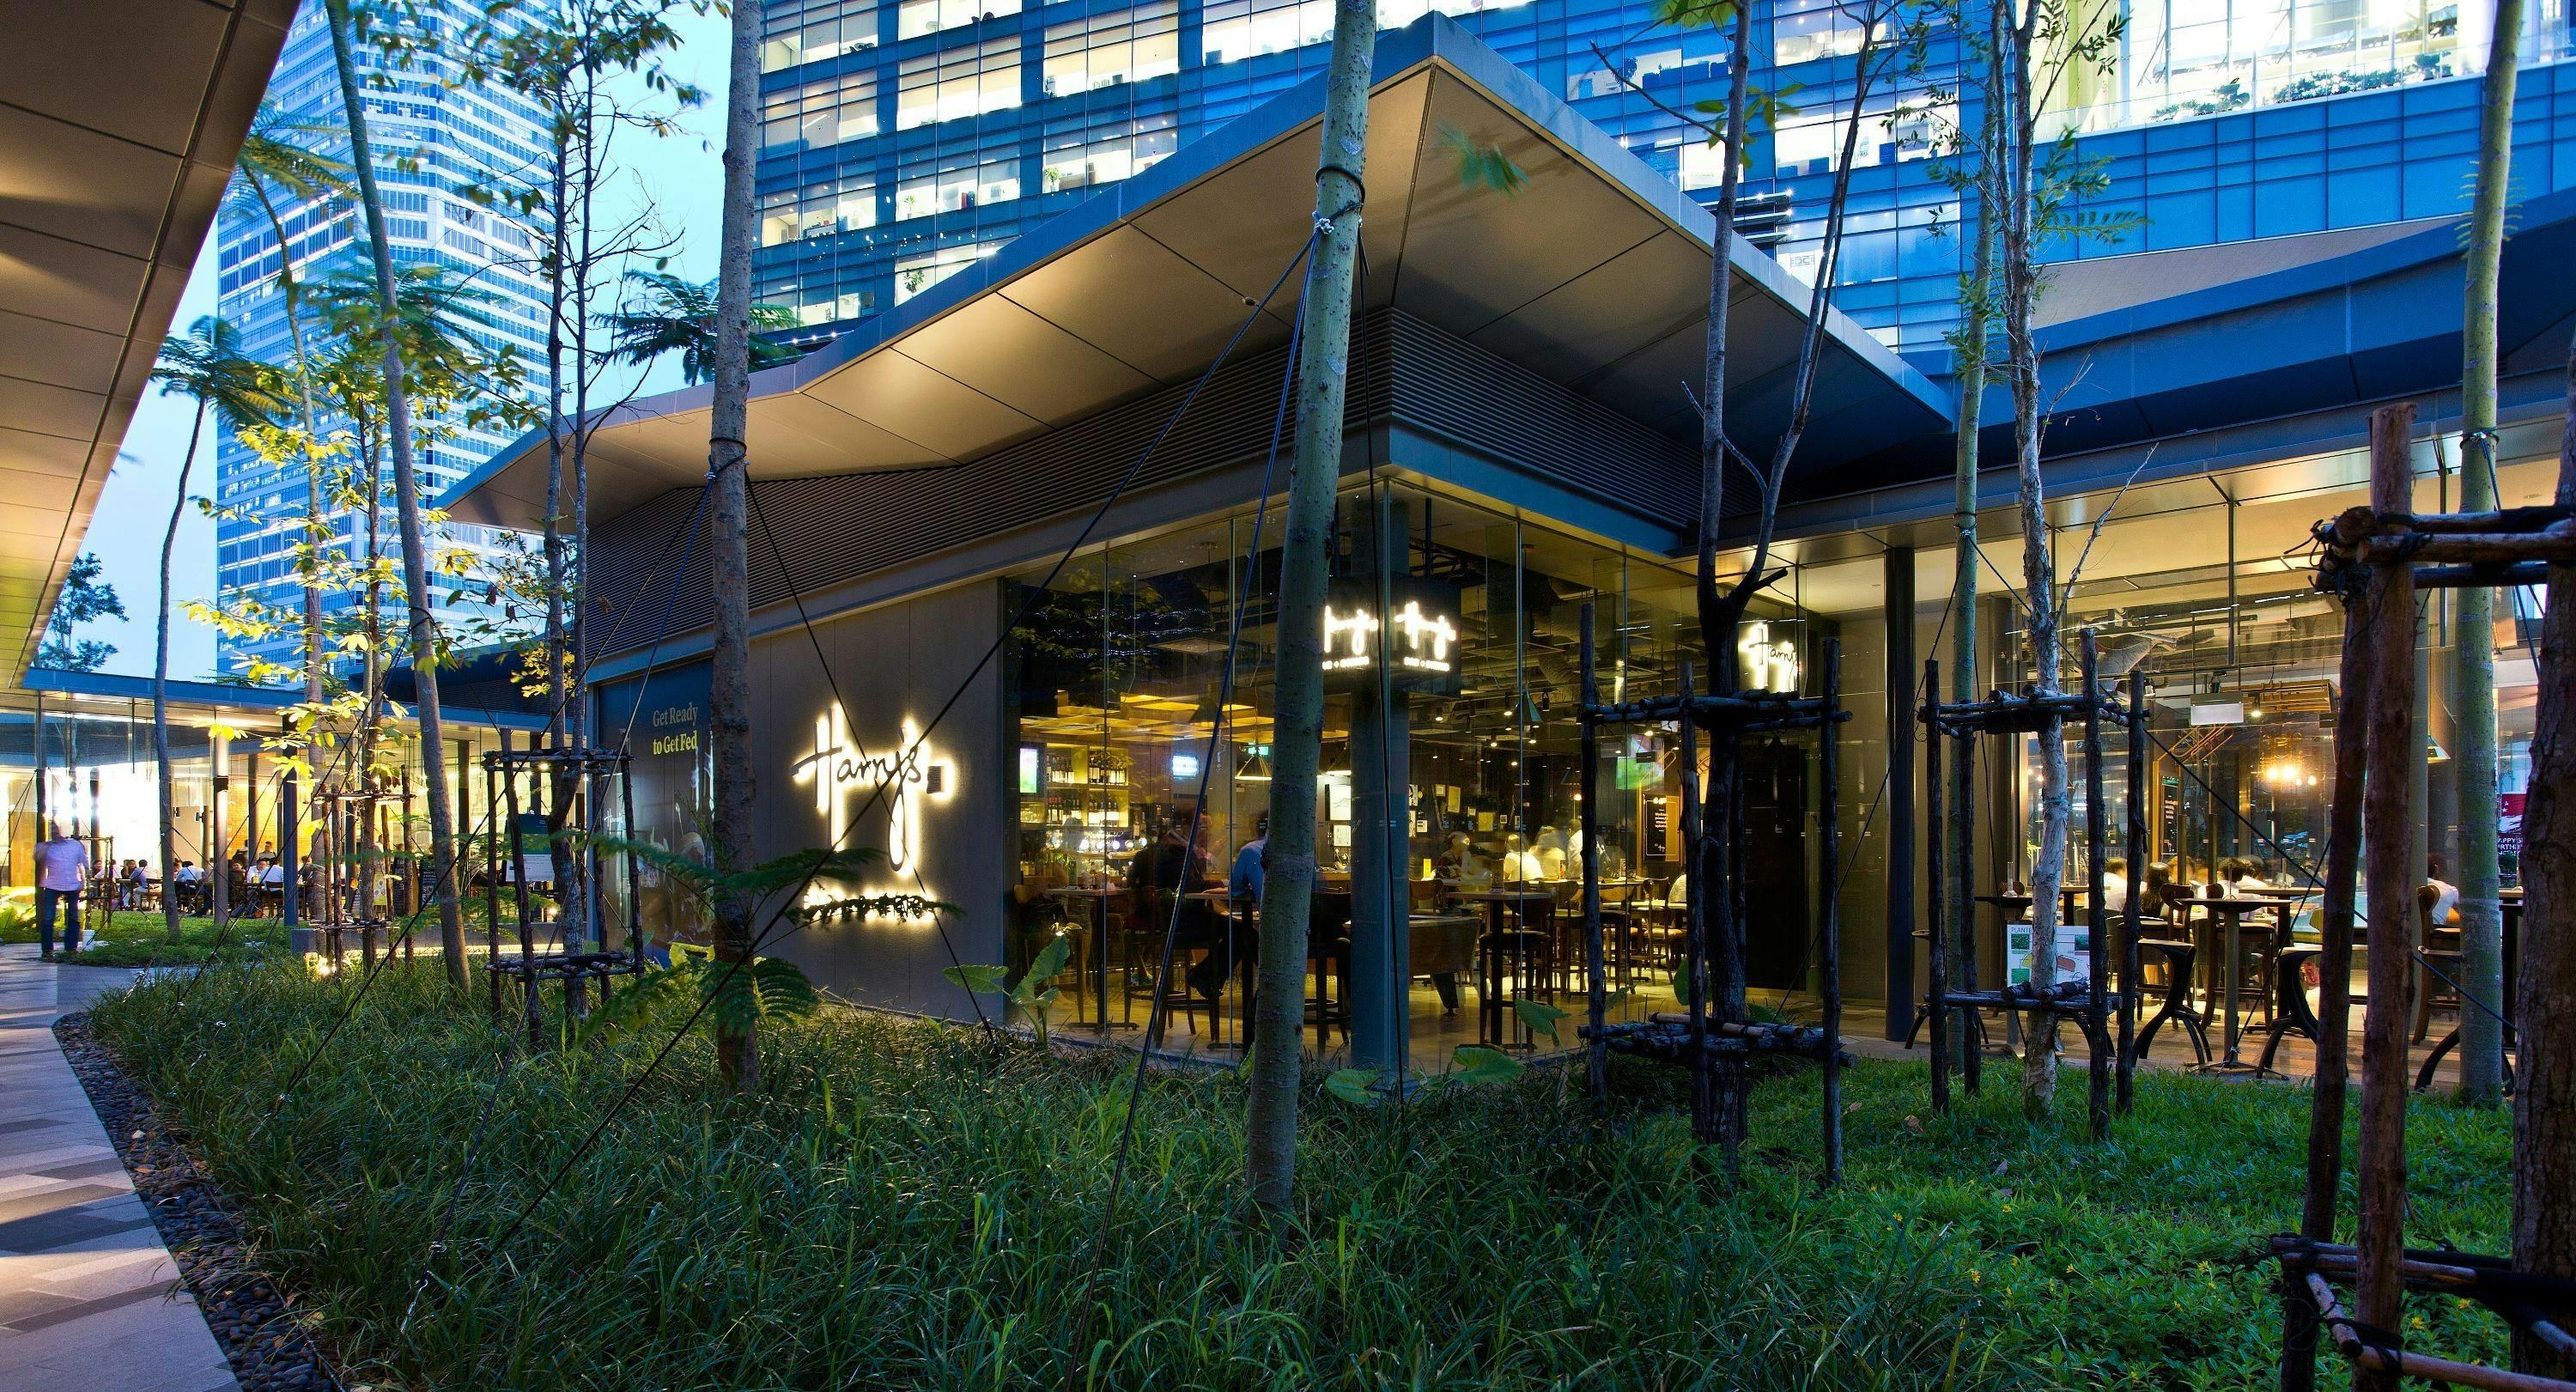 Photo of restaurant Harry's - Mapletree Business City in Labrador Park, Singapore